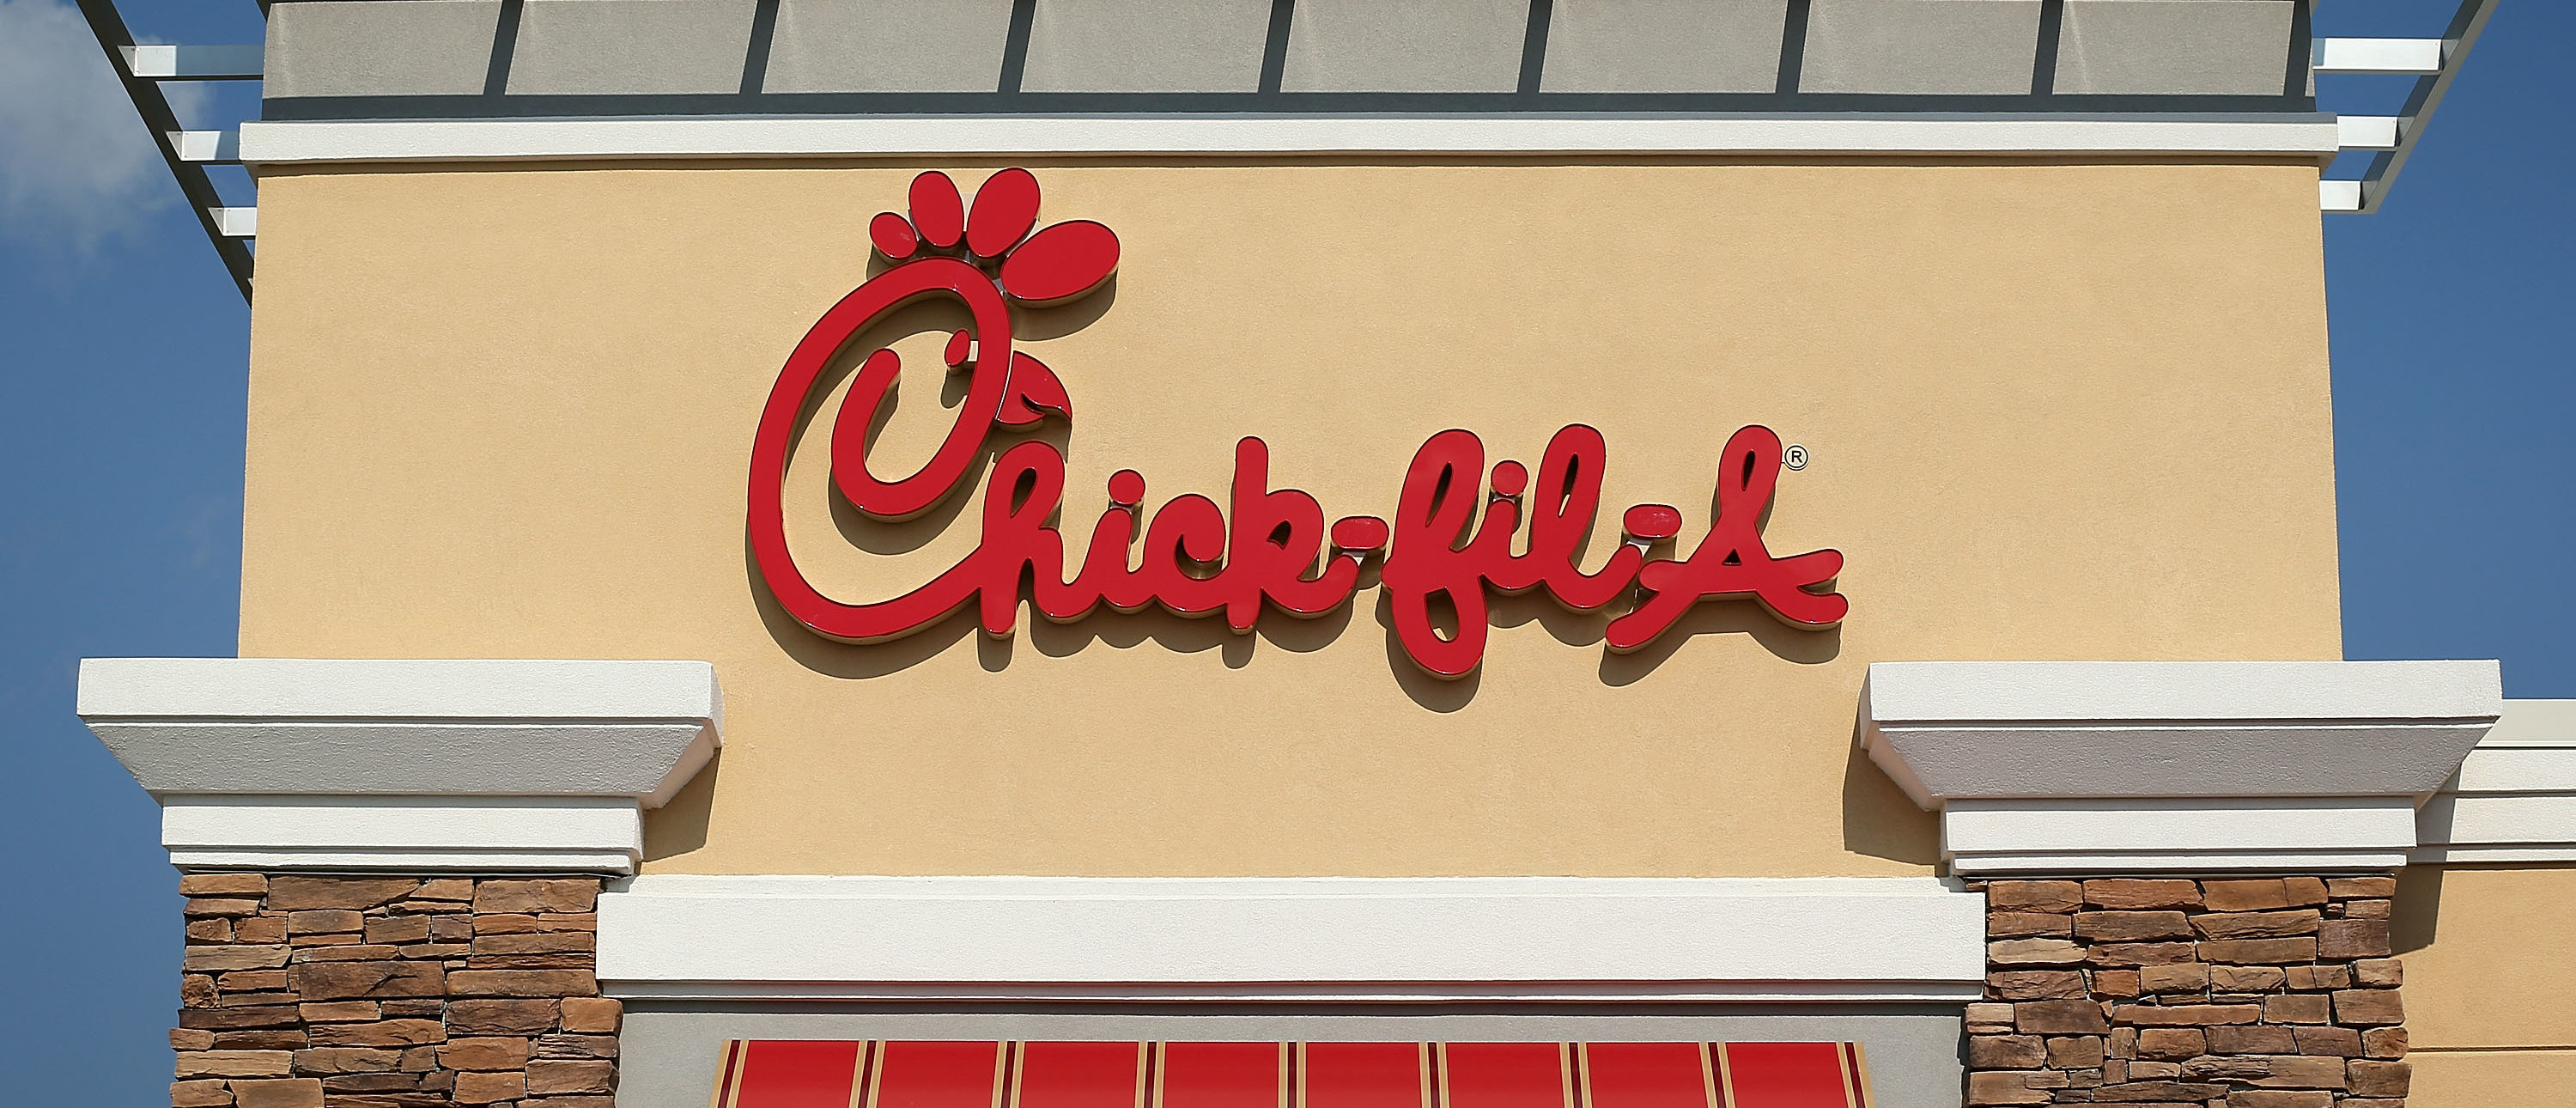 What This Chick-Fil-A Is Planning To Do With Its Employees During A ...